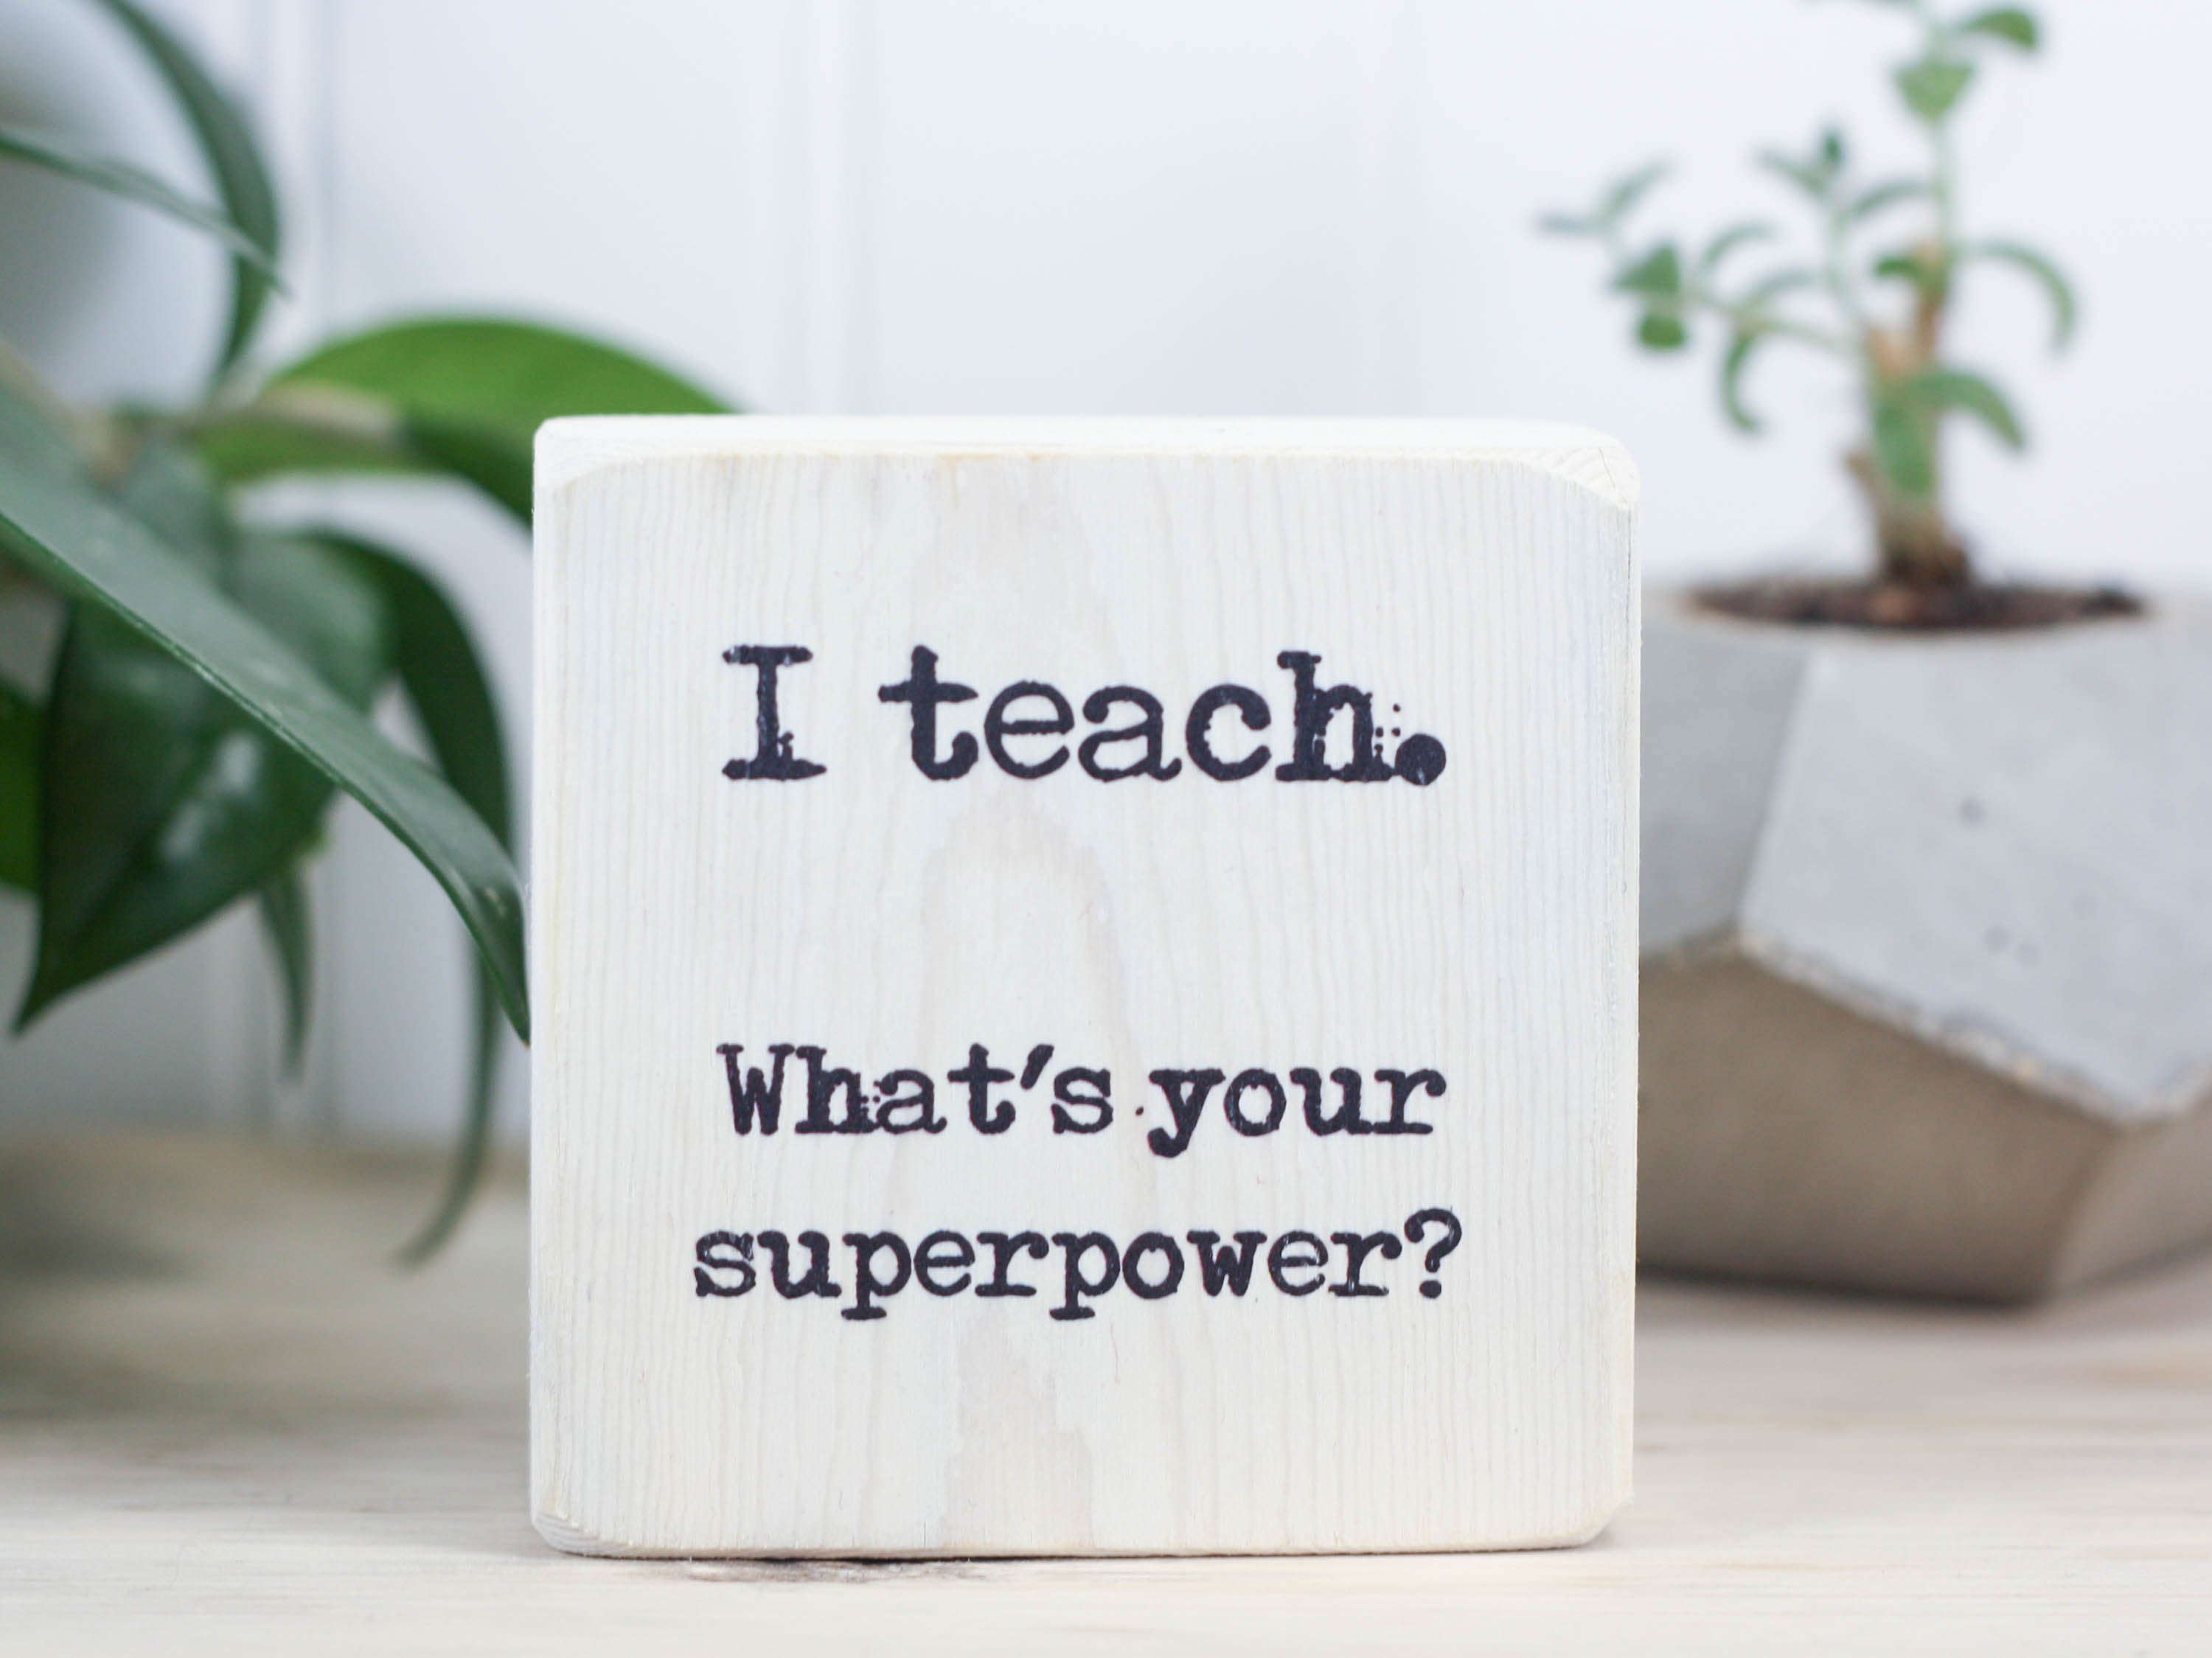 Mini wood sign in whitewash with the saying "I teach. What's your superower?"